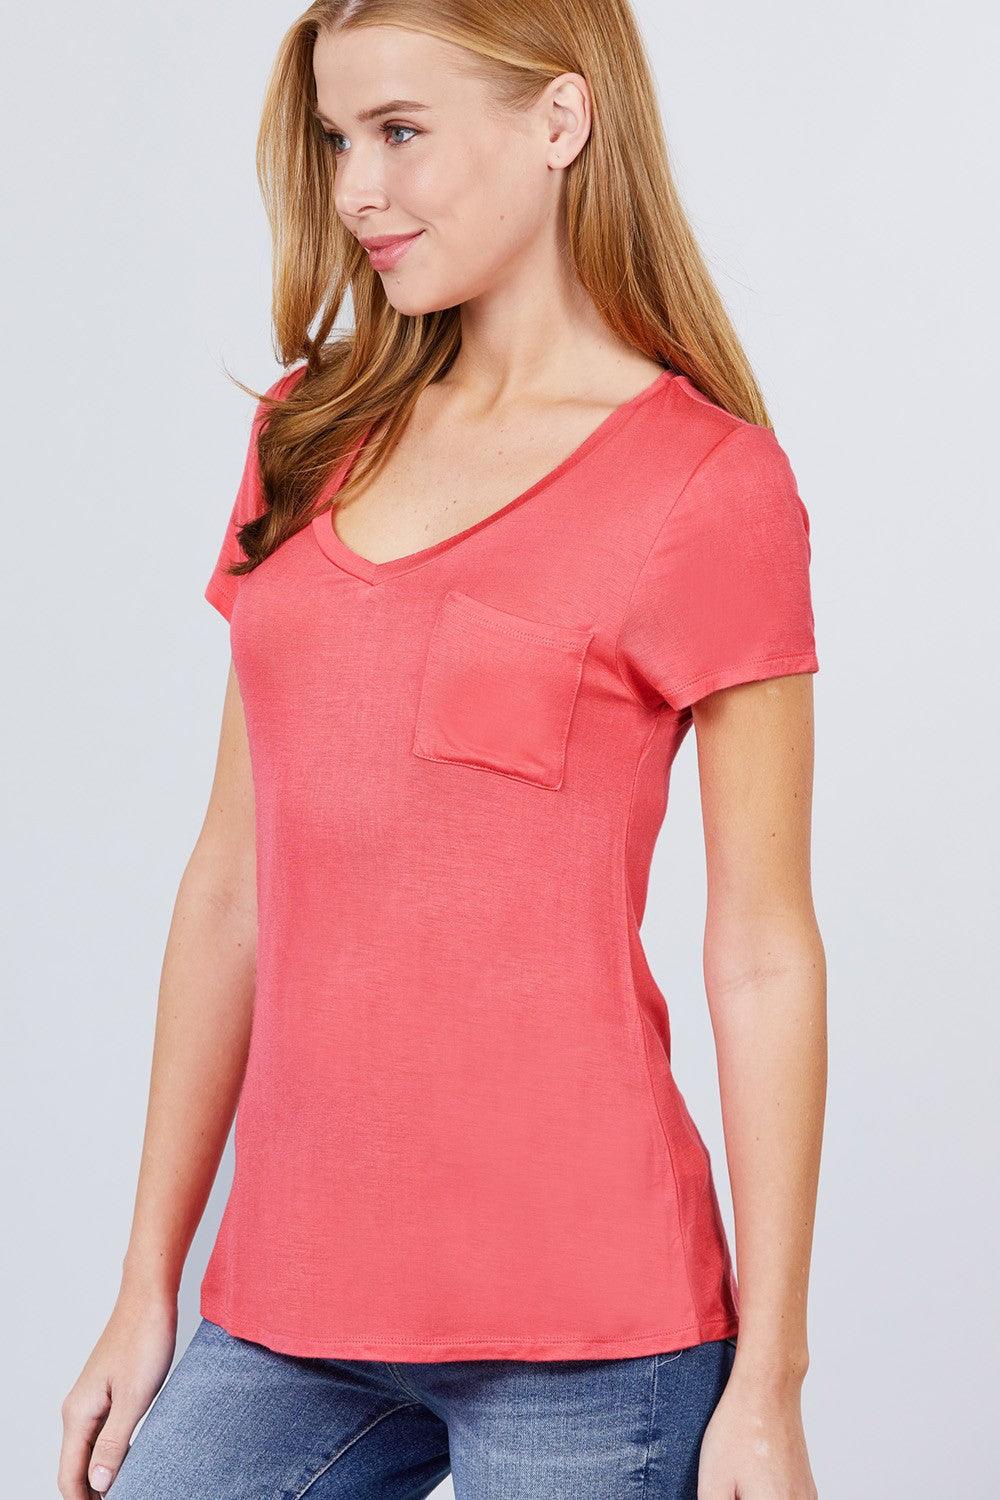 V-neck Rayon Jersey Top - Kreative Passions